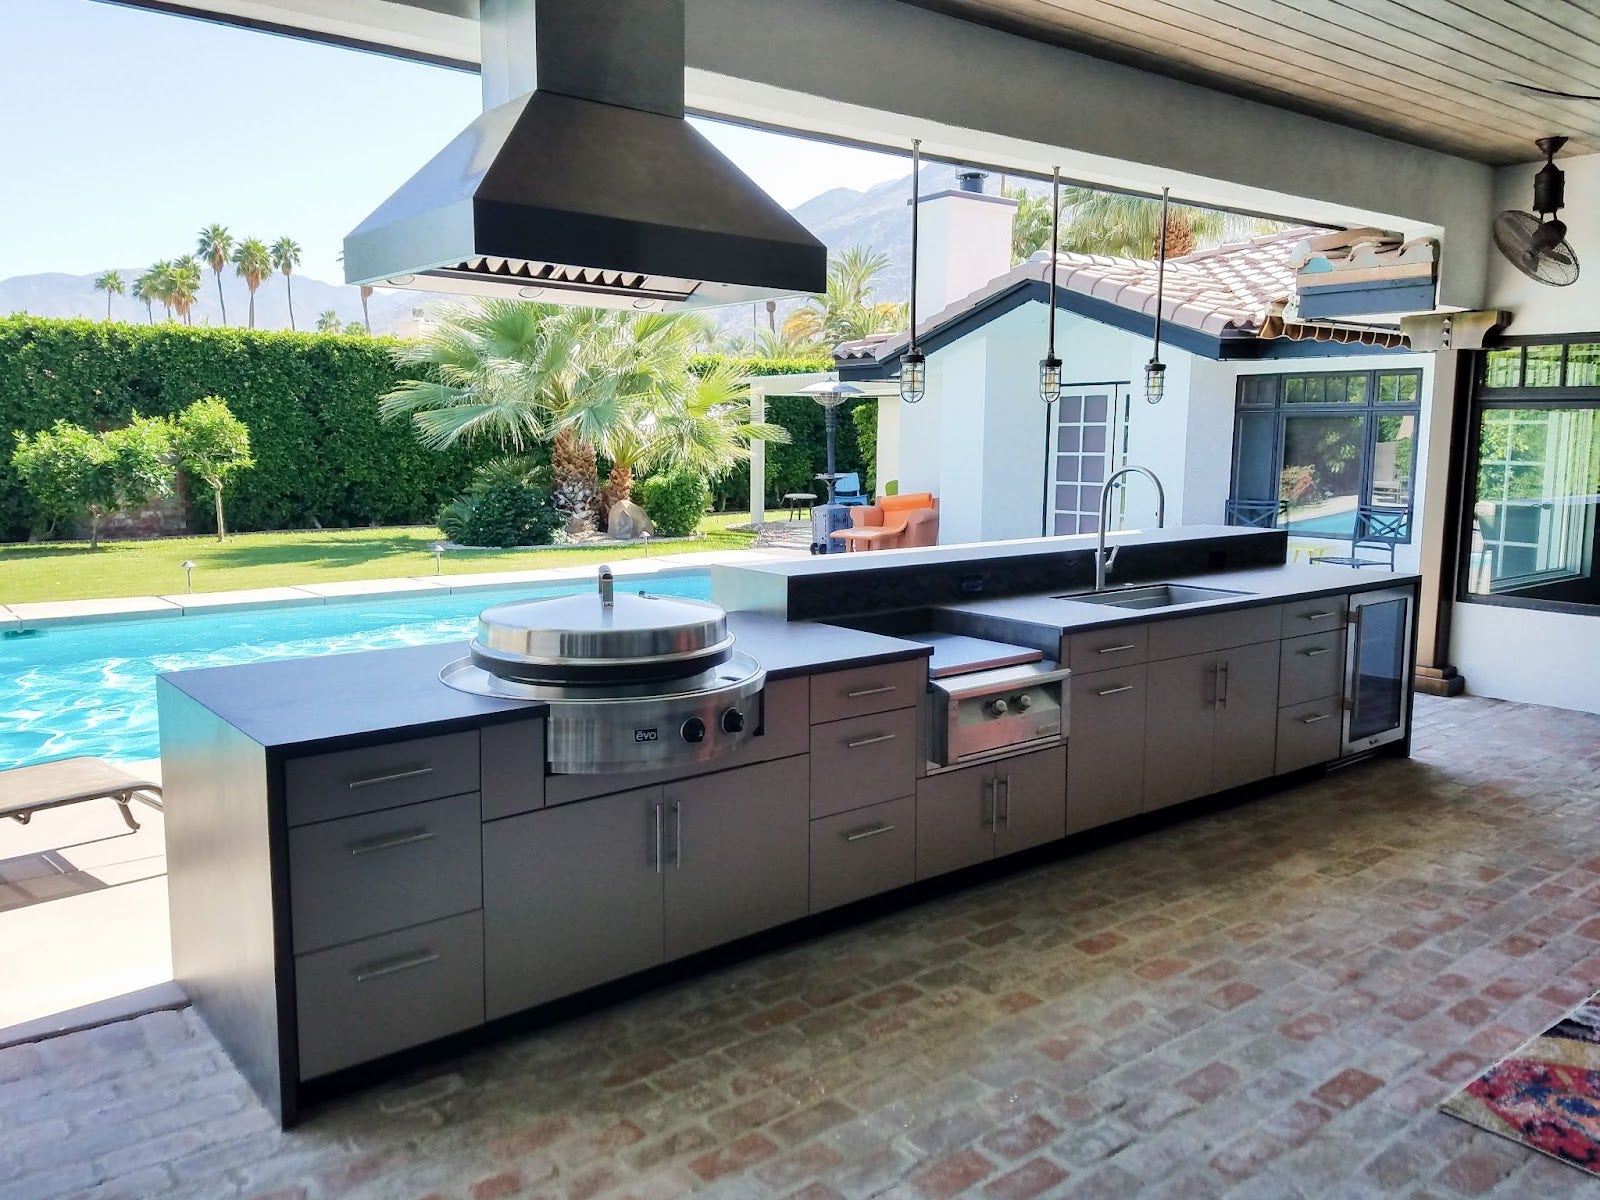 Resort-style outdoor kitchen setup with Proline ProVI range hood, complete with a pool and palm tree scenery in the background - prolinerangehoods.com